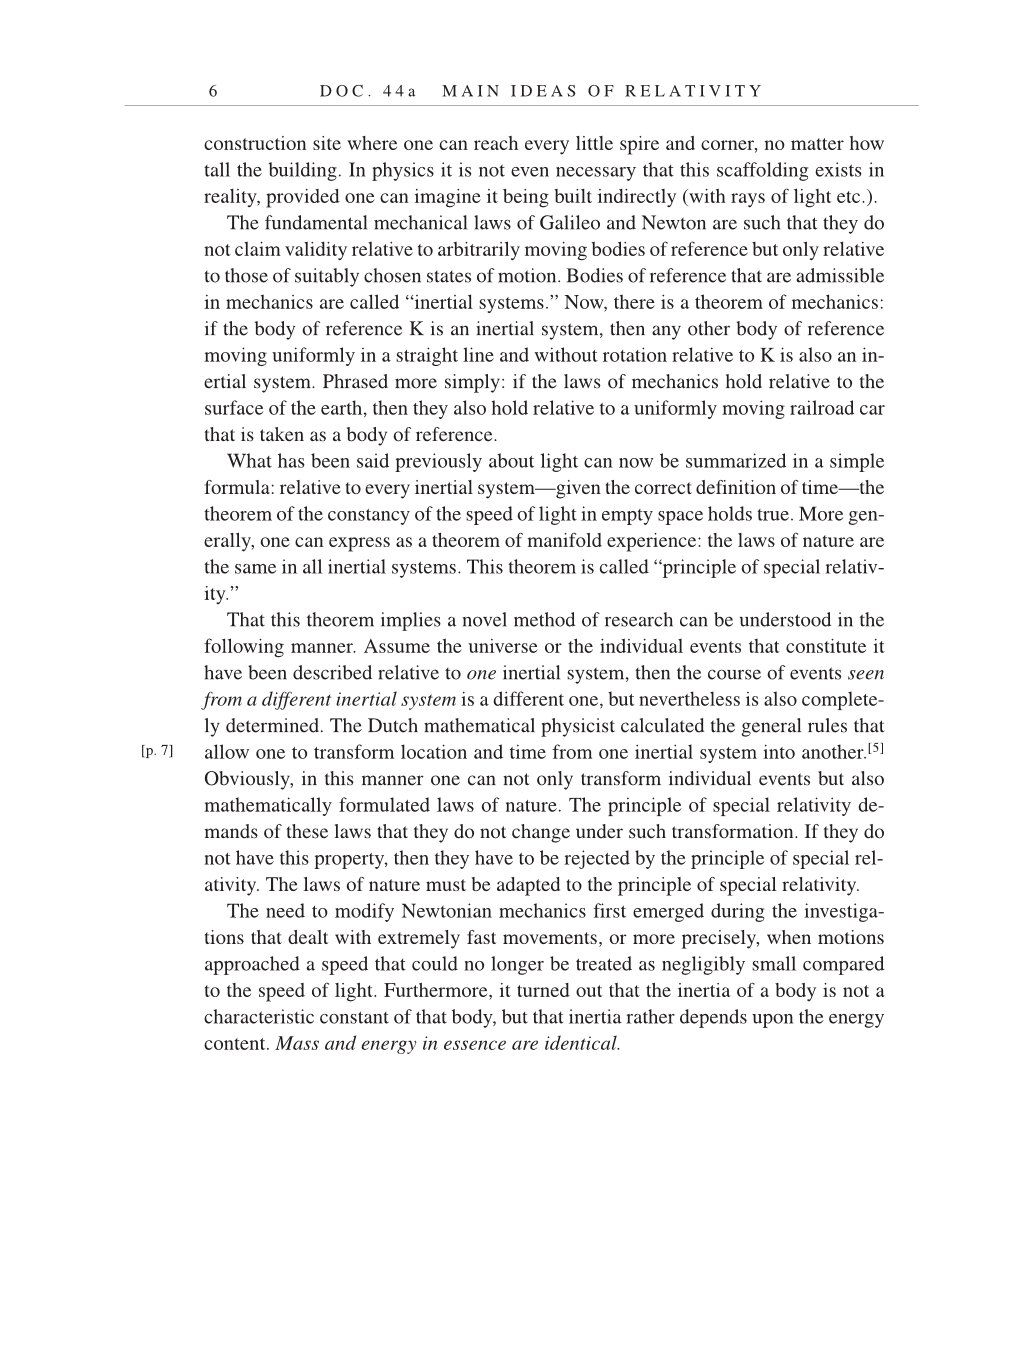 Volume 7: The Berlin Years: Writings, 1918-1921 (English translation supplement) page 6